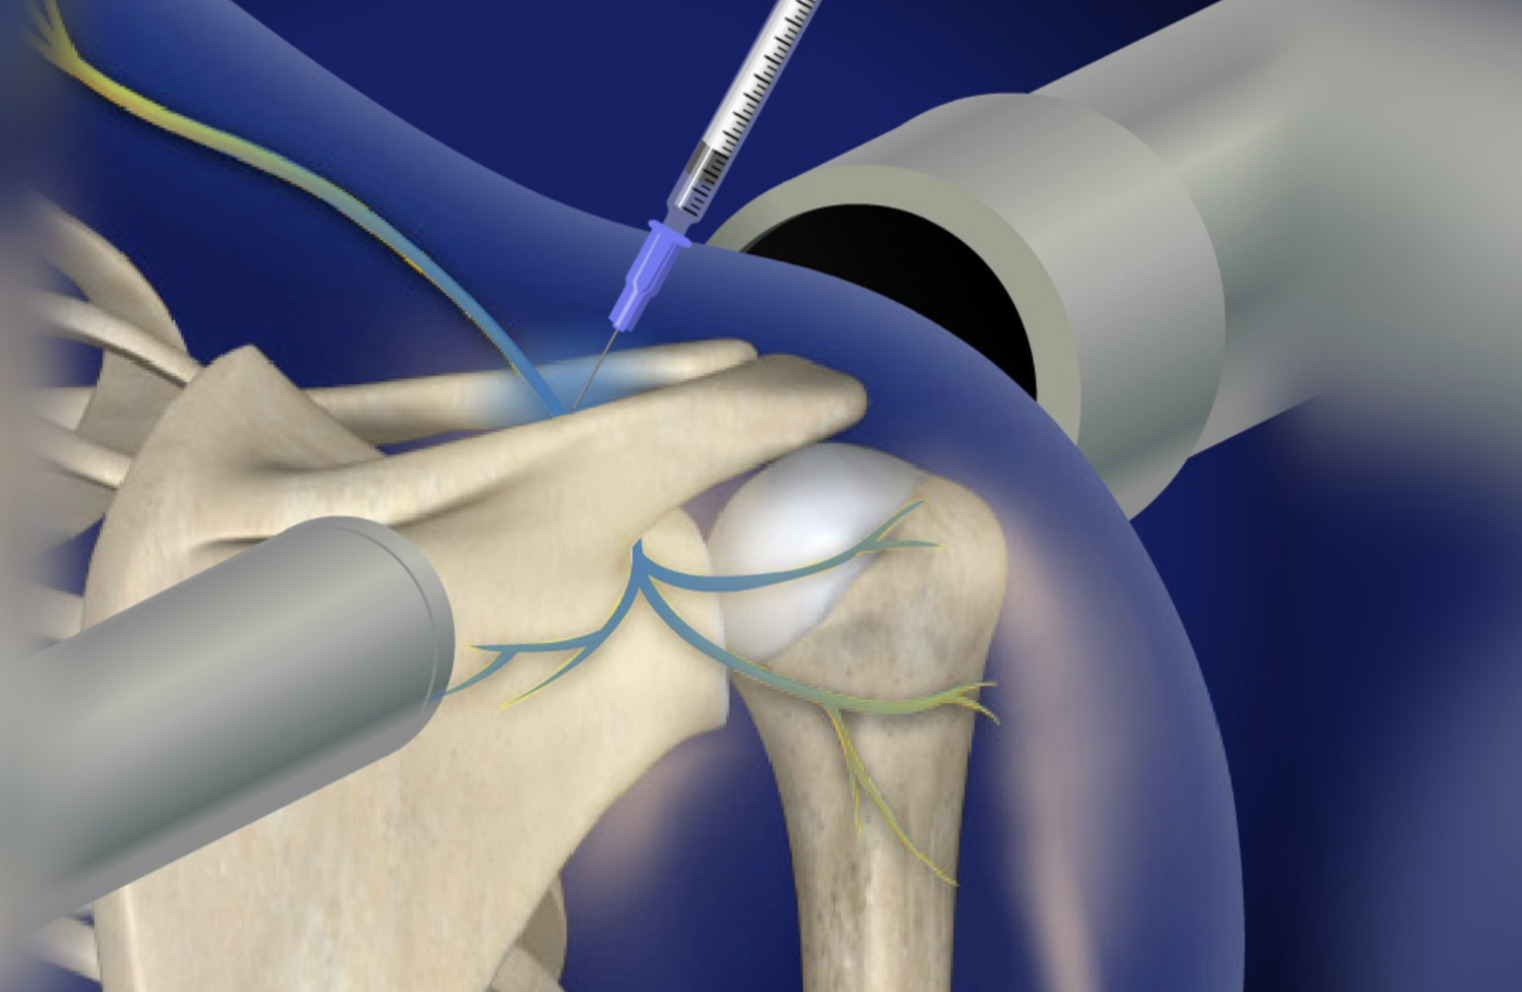 Suprascapular Nerve Block and Radiofrequency Ablation
                                                          